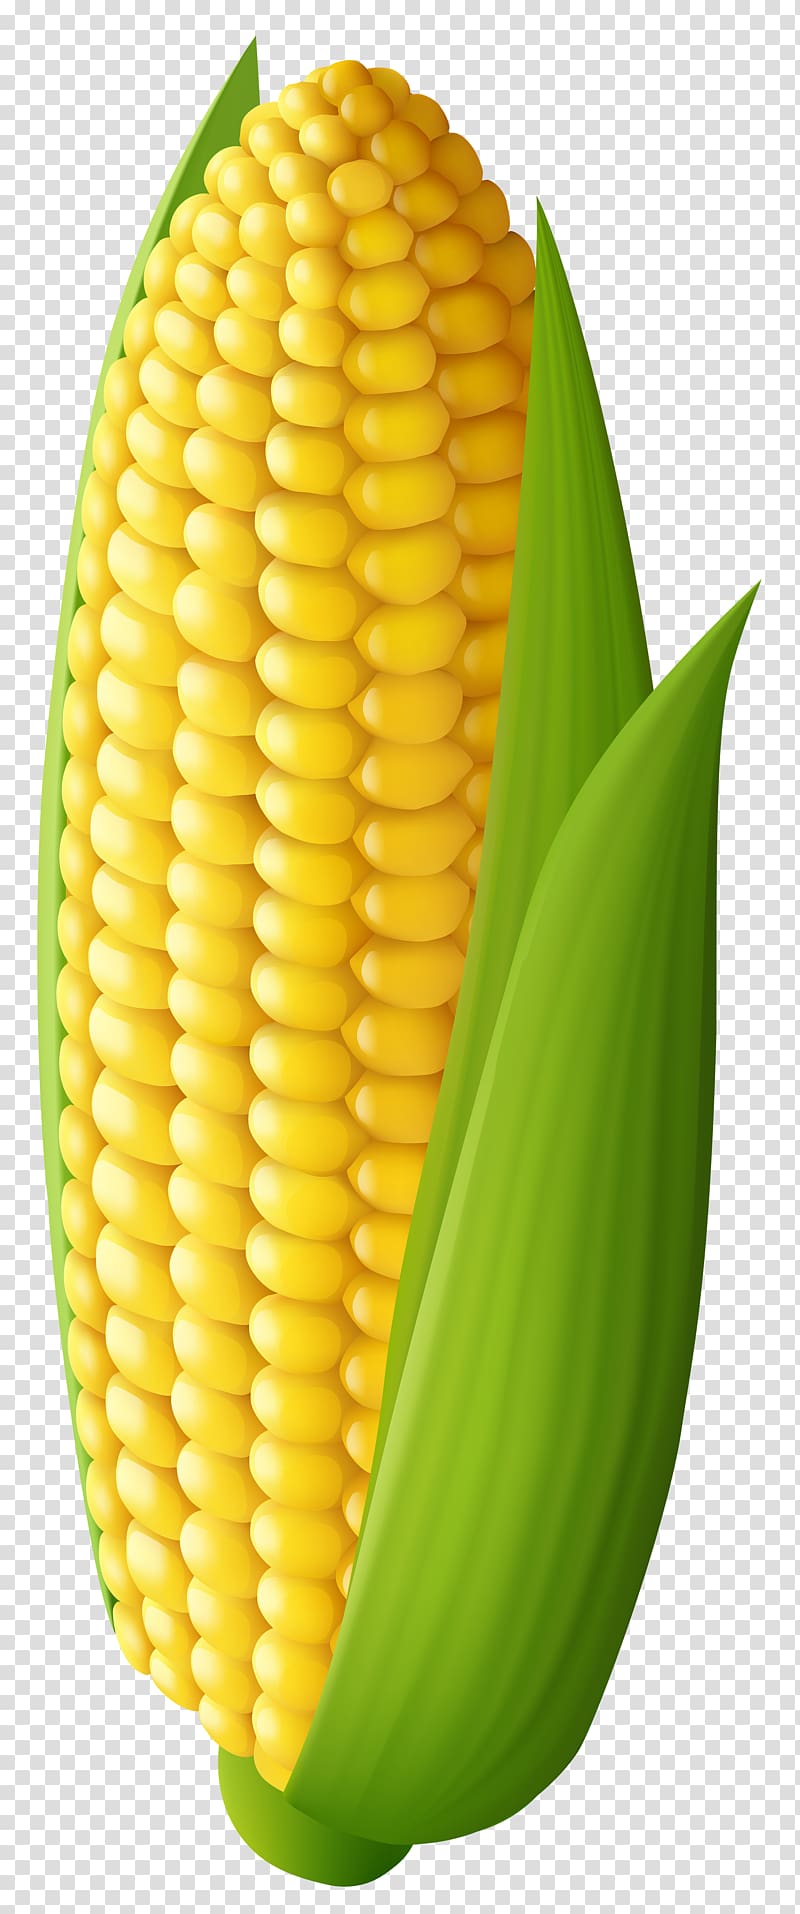 sweetcorn with leaves, Corn on the cob Maize , Corn transparent background PNG clipart